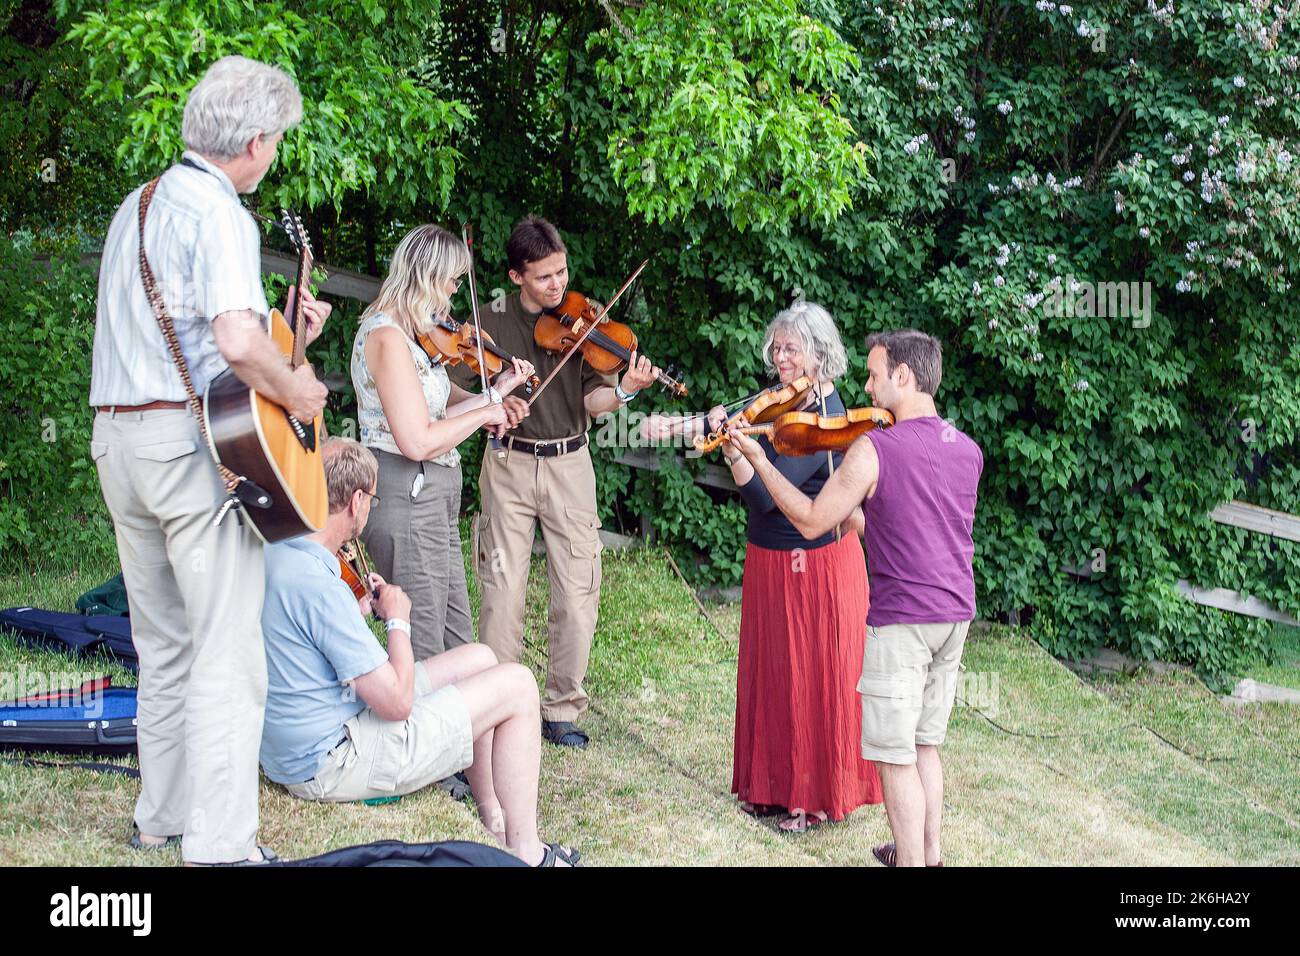 FIDDLERS MEETING at folk music session outdoor festival Stock Photo